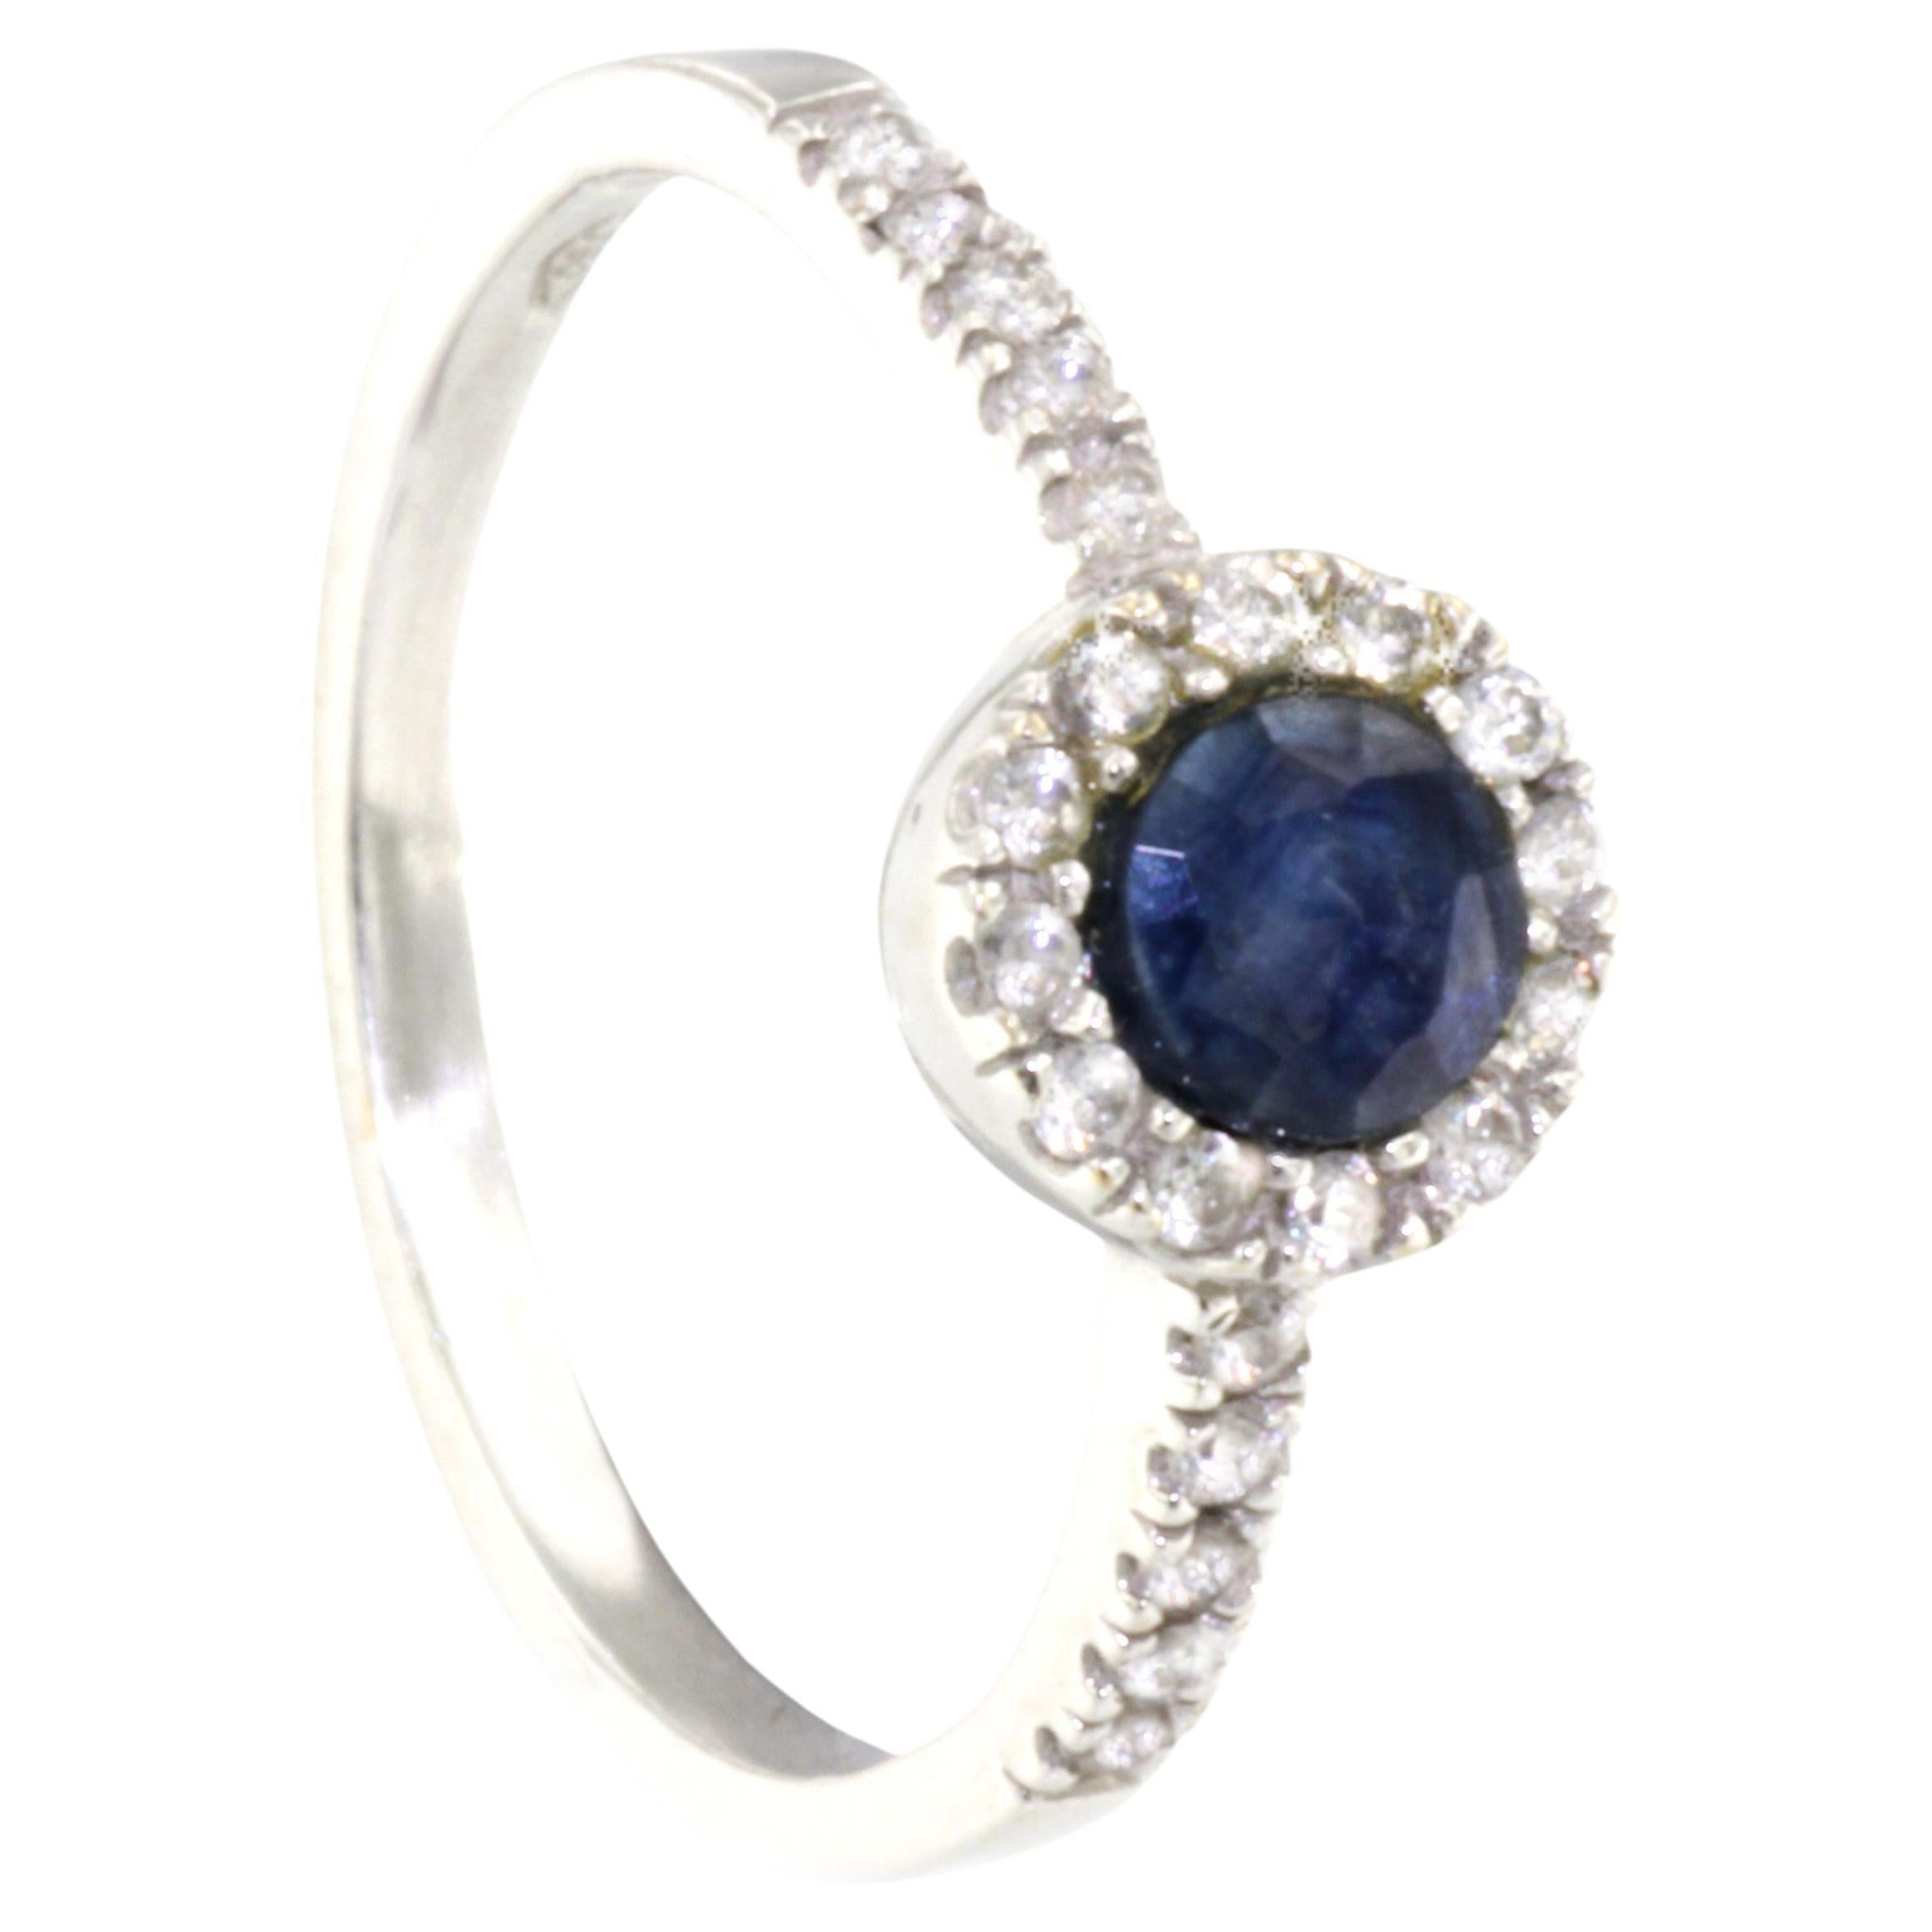 18Kt White Gold Whit White Diamonds and Sapphire Ring